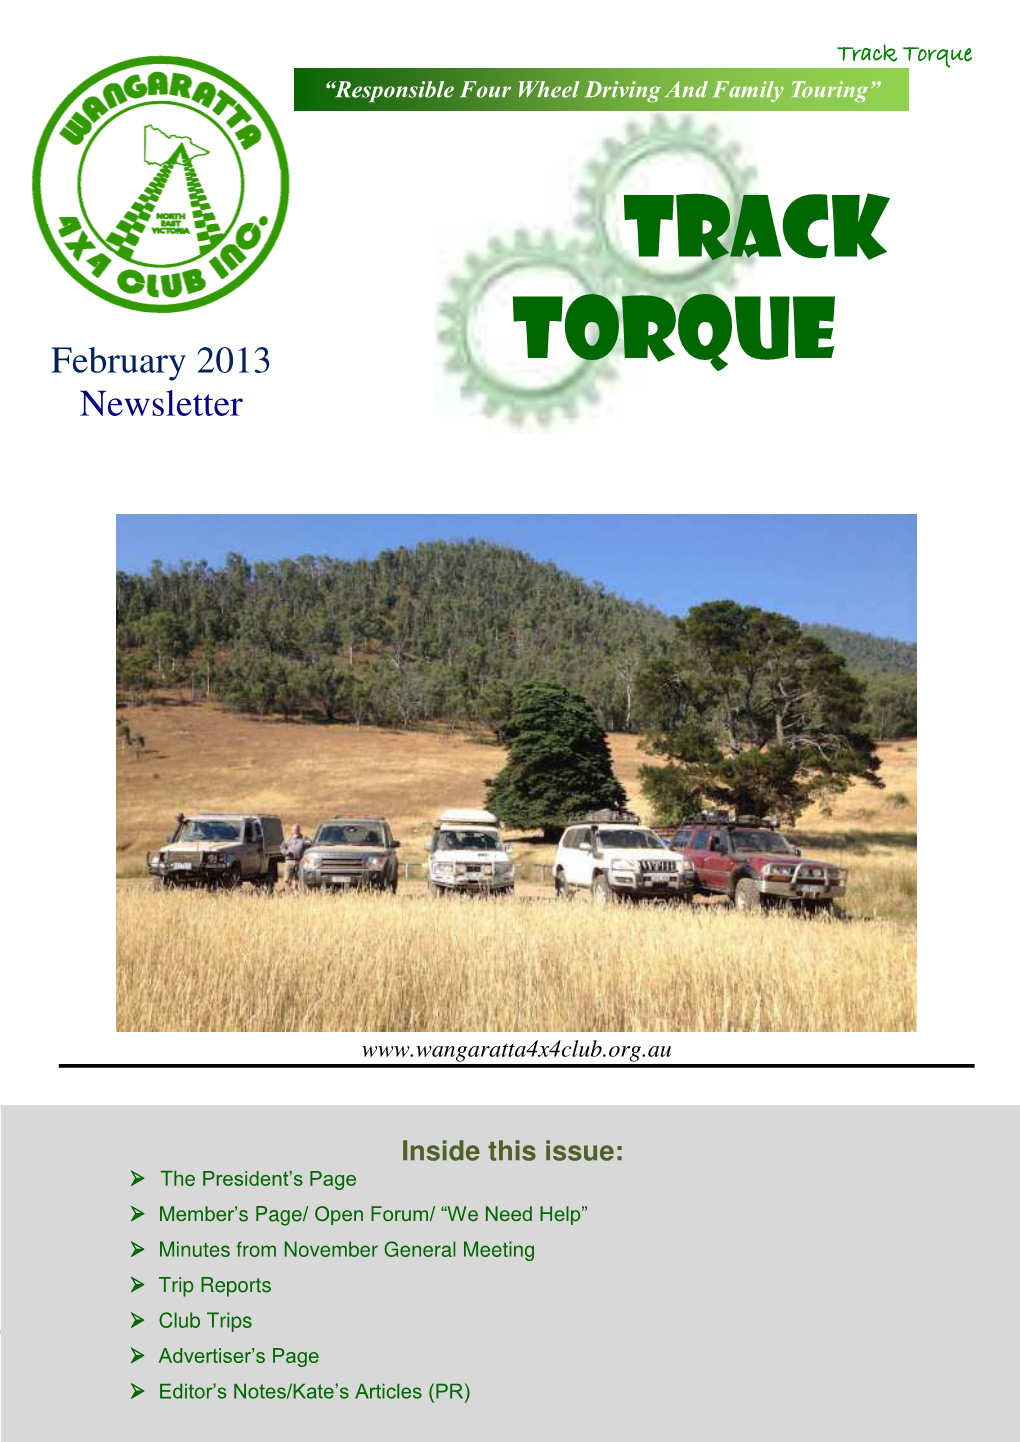 Track Torque “Responsible Four Wheel Driving and Family Touring”